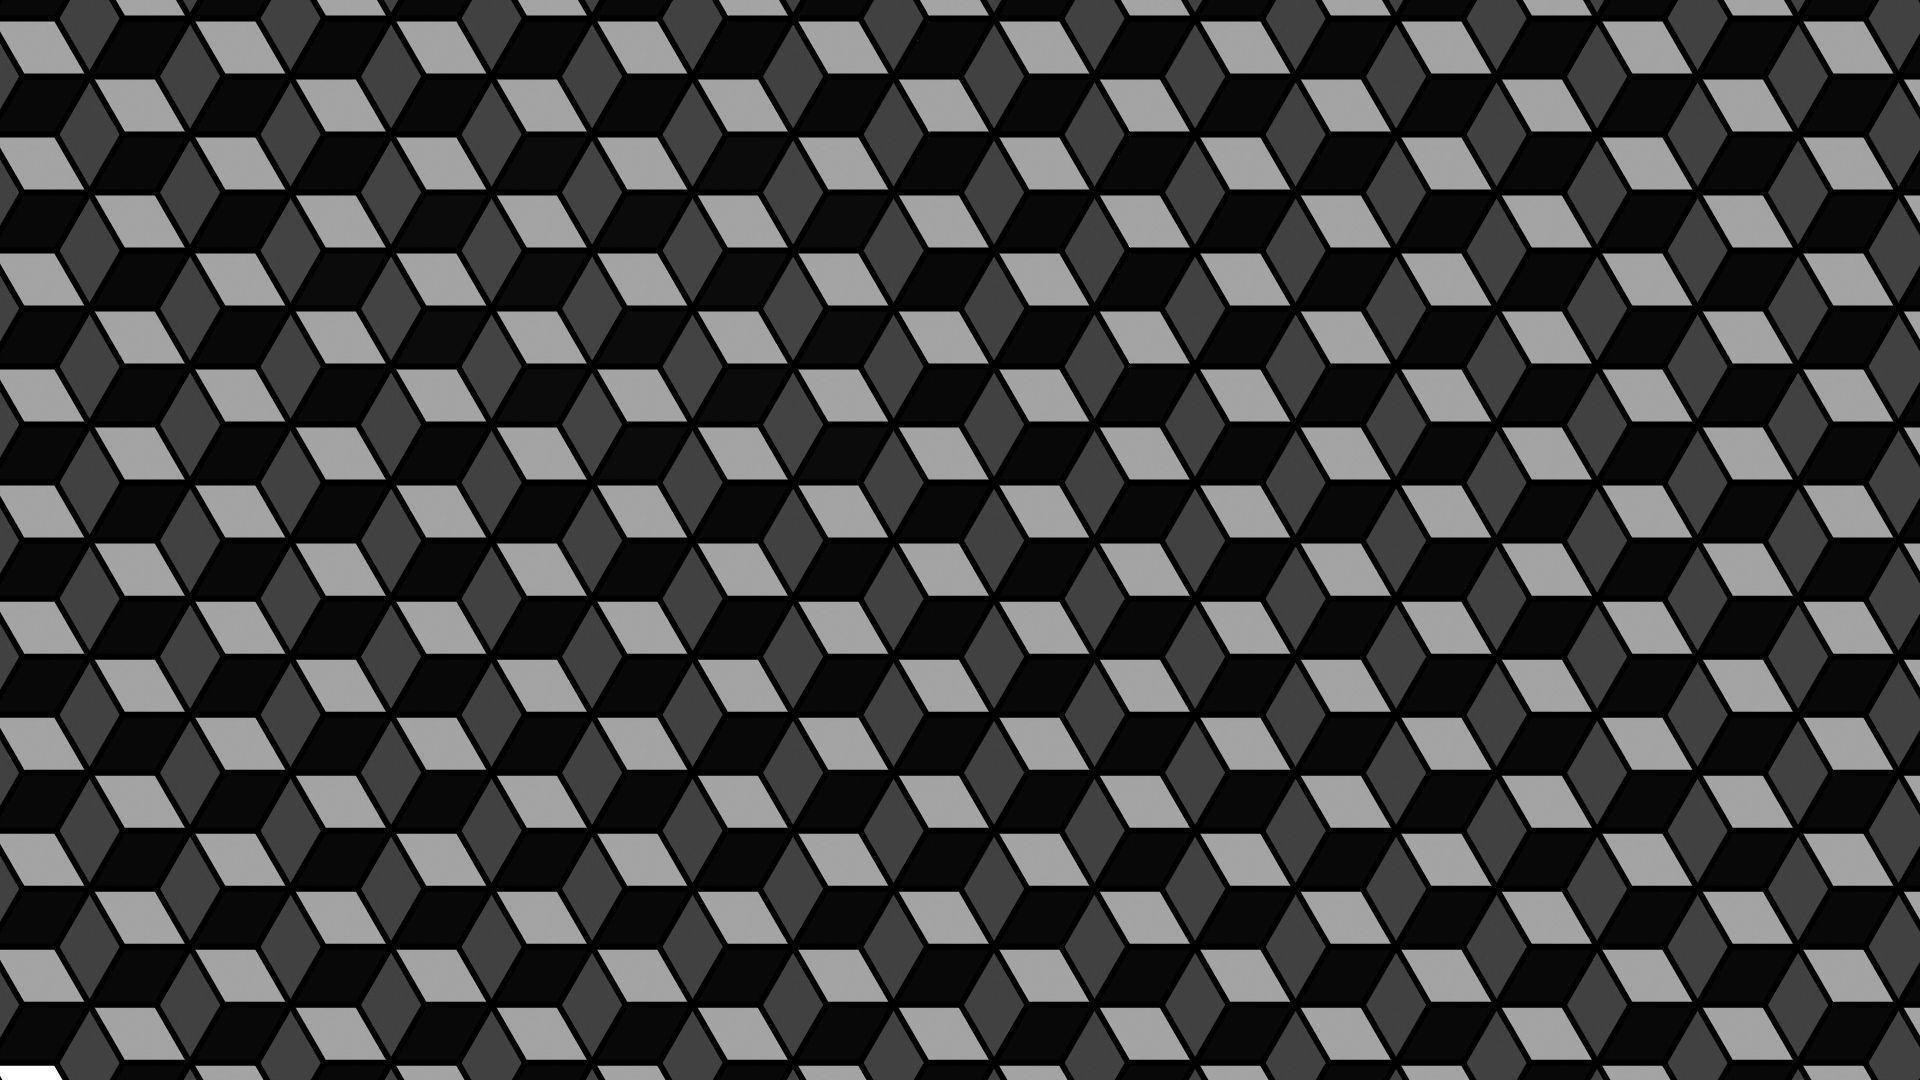 1920x1080 optical illusion wallpaper iphone lovely optical illusions backgrounds  wallpaper cave of optical illusion wallpaper iphone